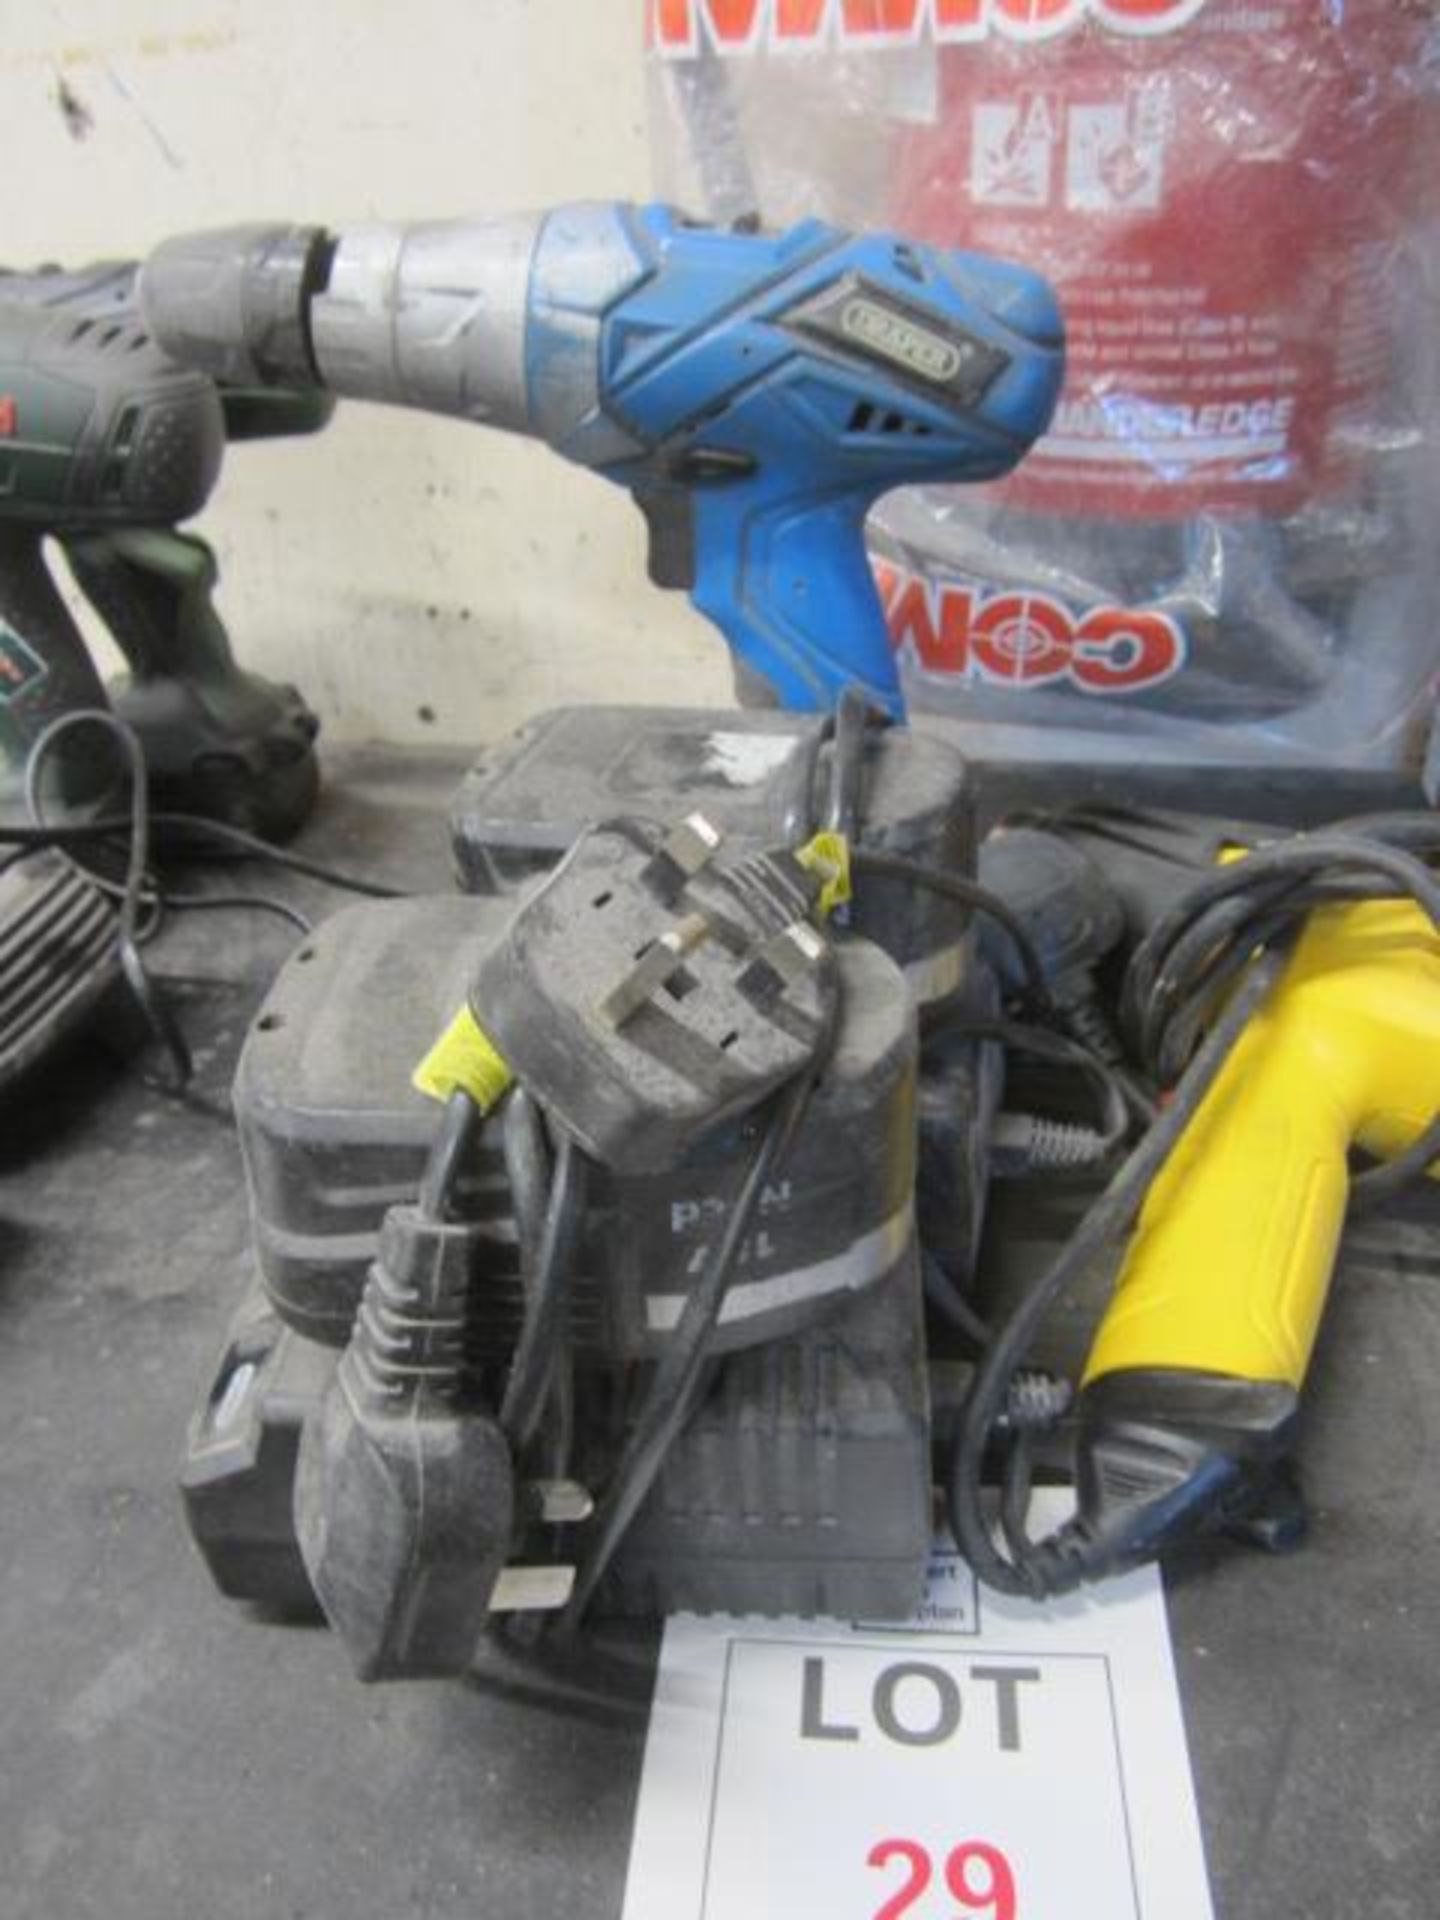 Draper cordless drill, 2 x batteries/chargers, 1 x Wagner hot air gun, 240v. Located at Supreme - Image 2 of 3